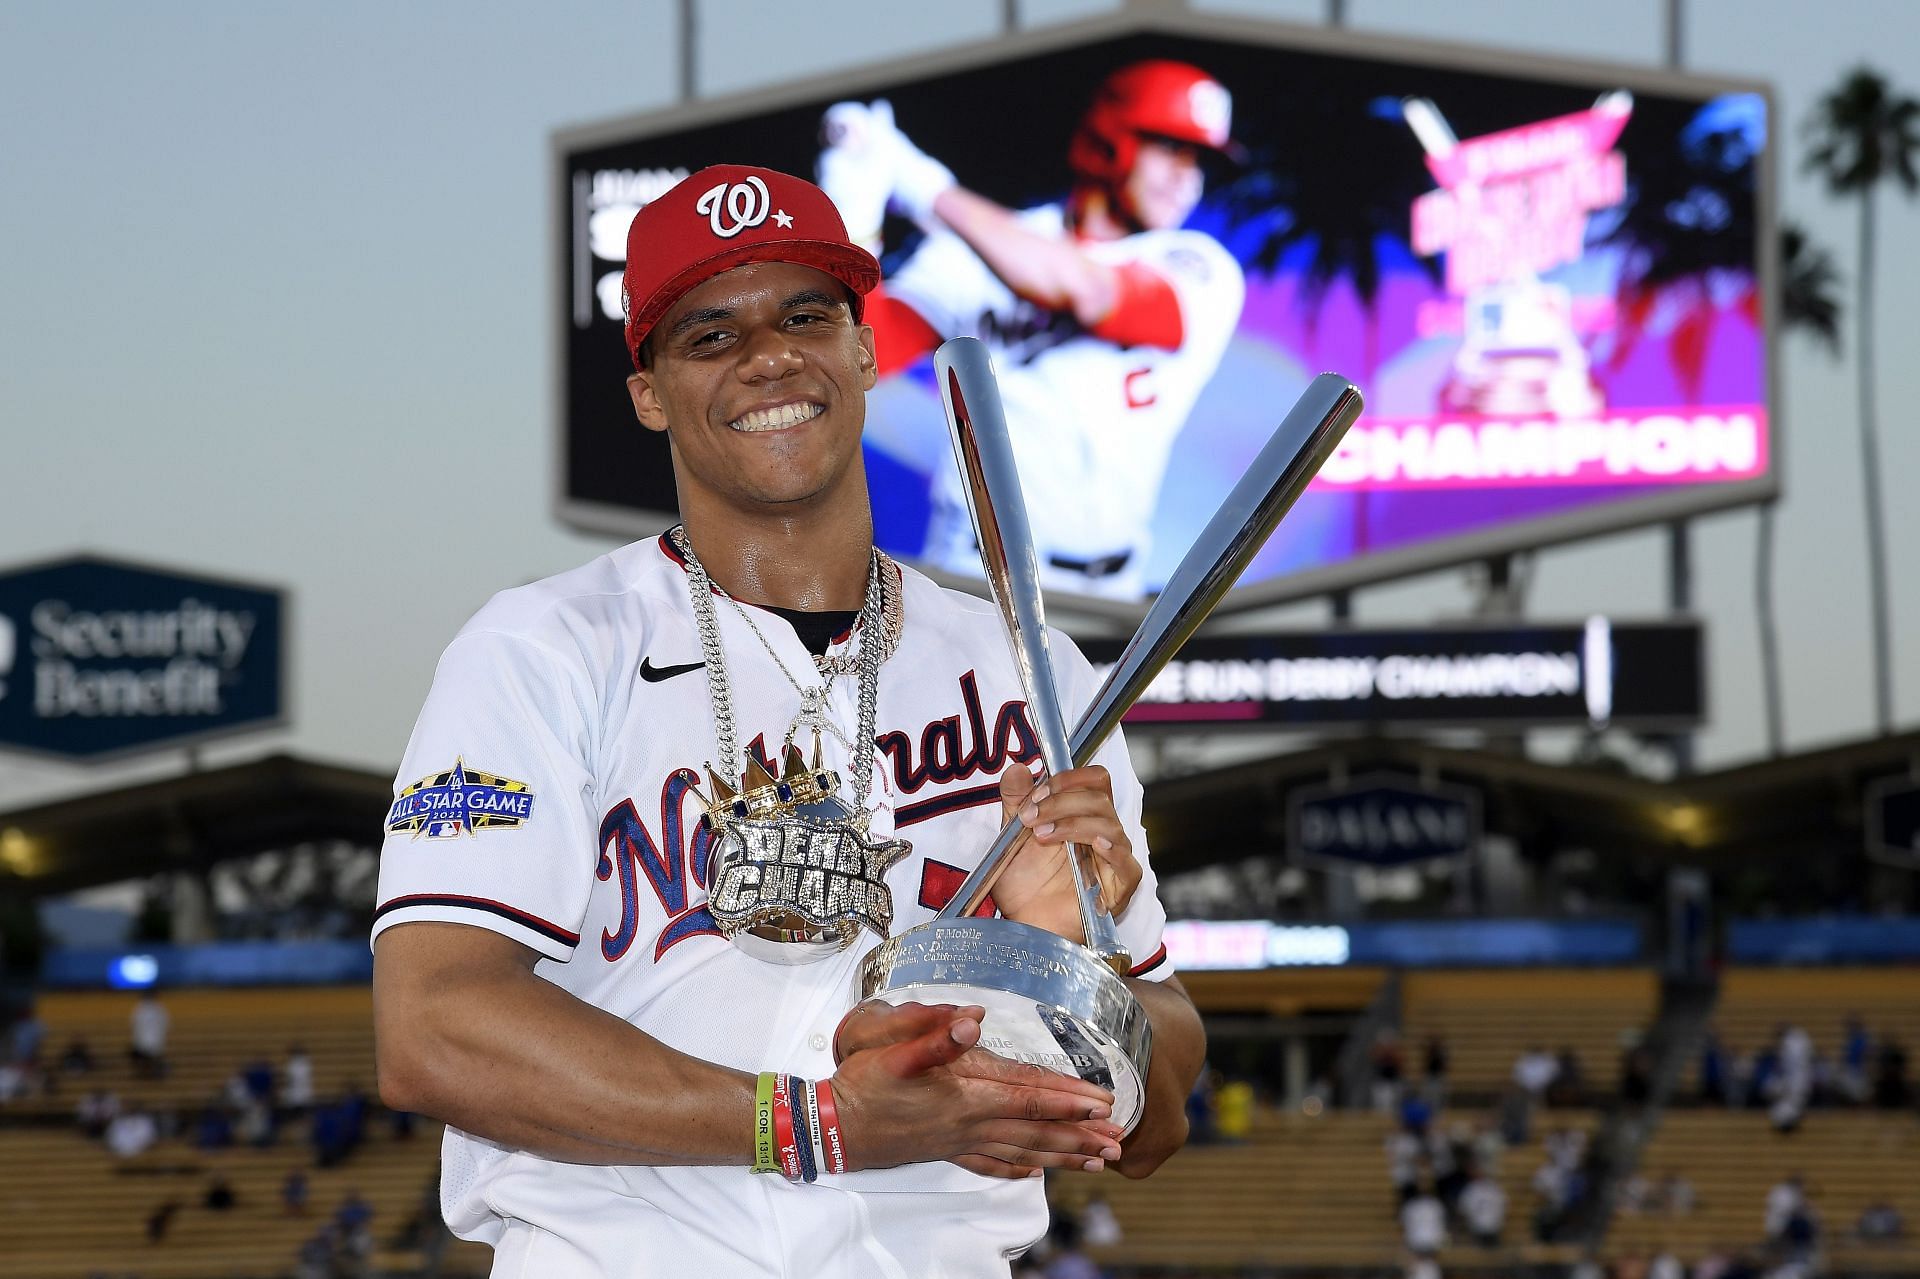 2022 T-Mobile Home Run Derby winner is on the trade block